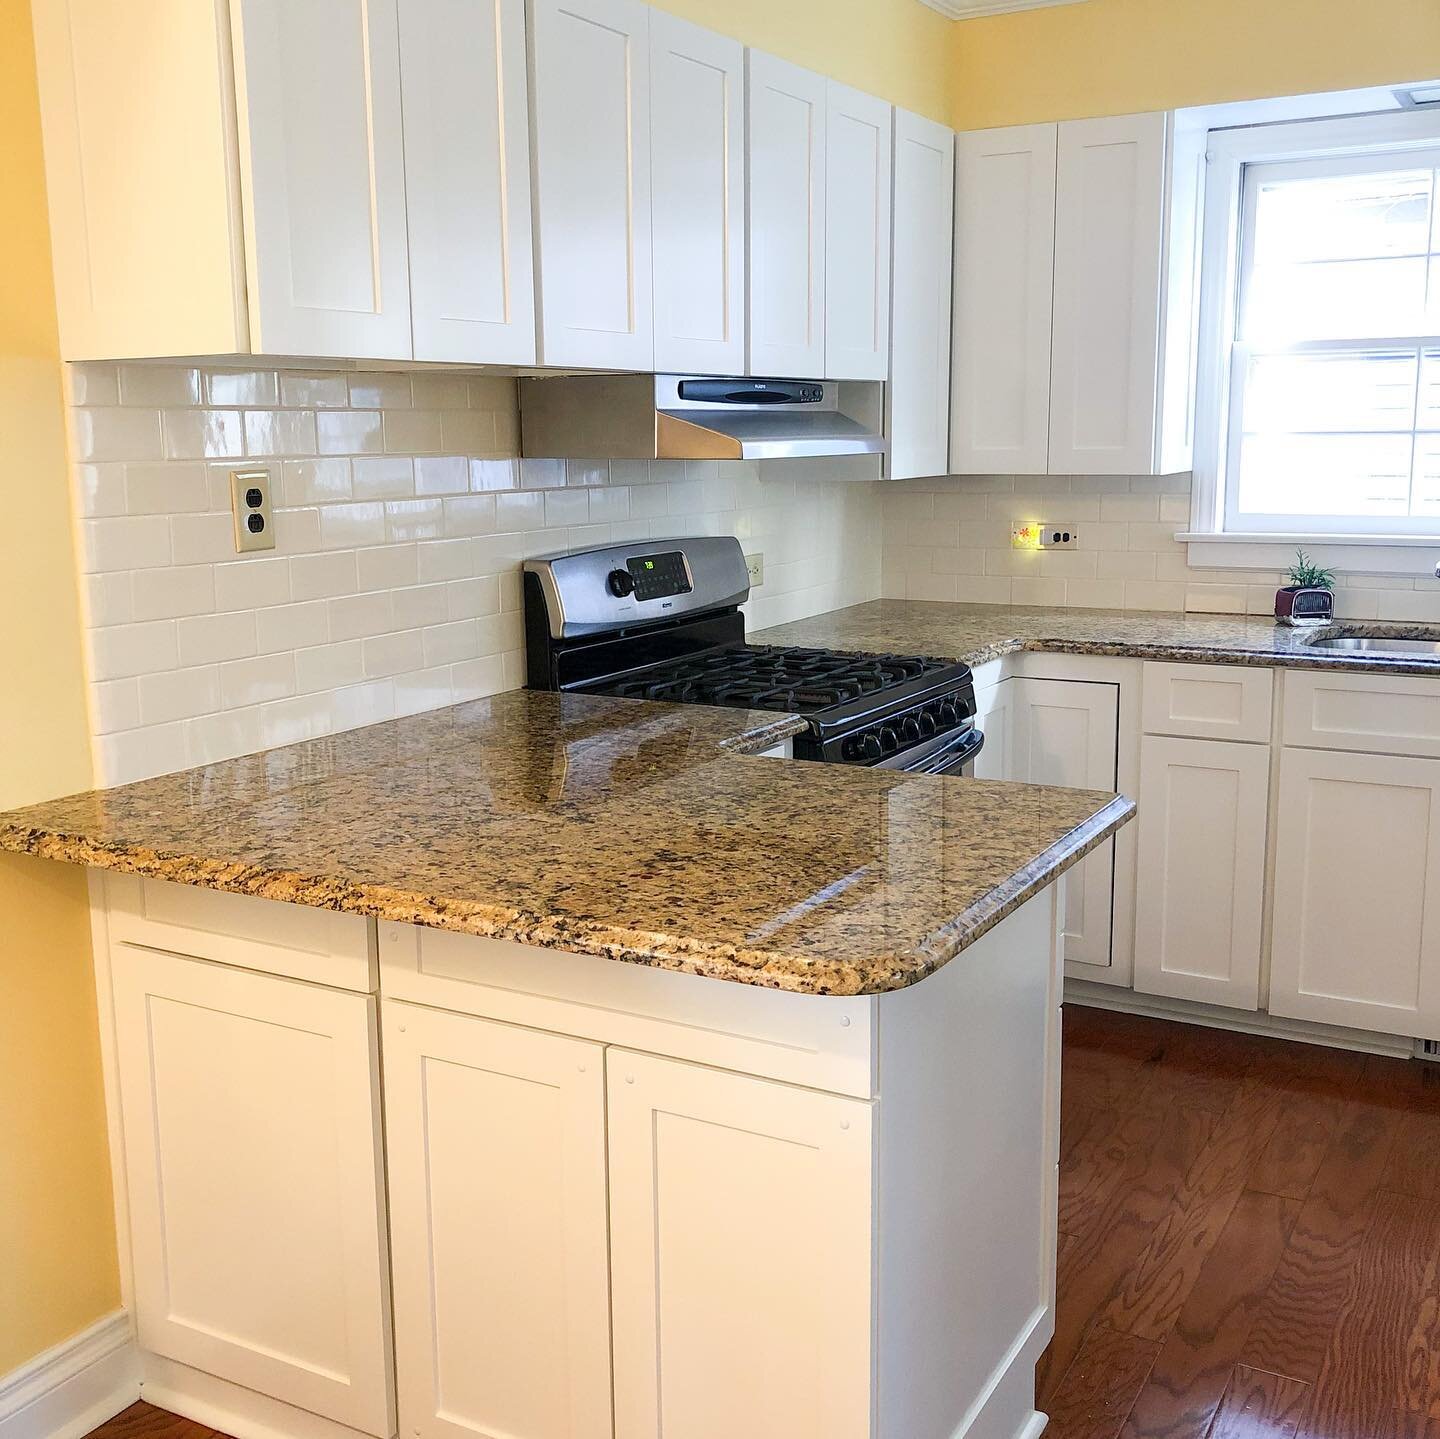 Refacing your cabinets can be an affordable way to update and brighten up your kitchen. We simply remove the doors and drawer fronts and build fronts in the style you choose. In this particular kitchen we also upgraded all the hinges and drawer glide